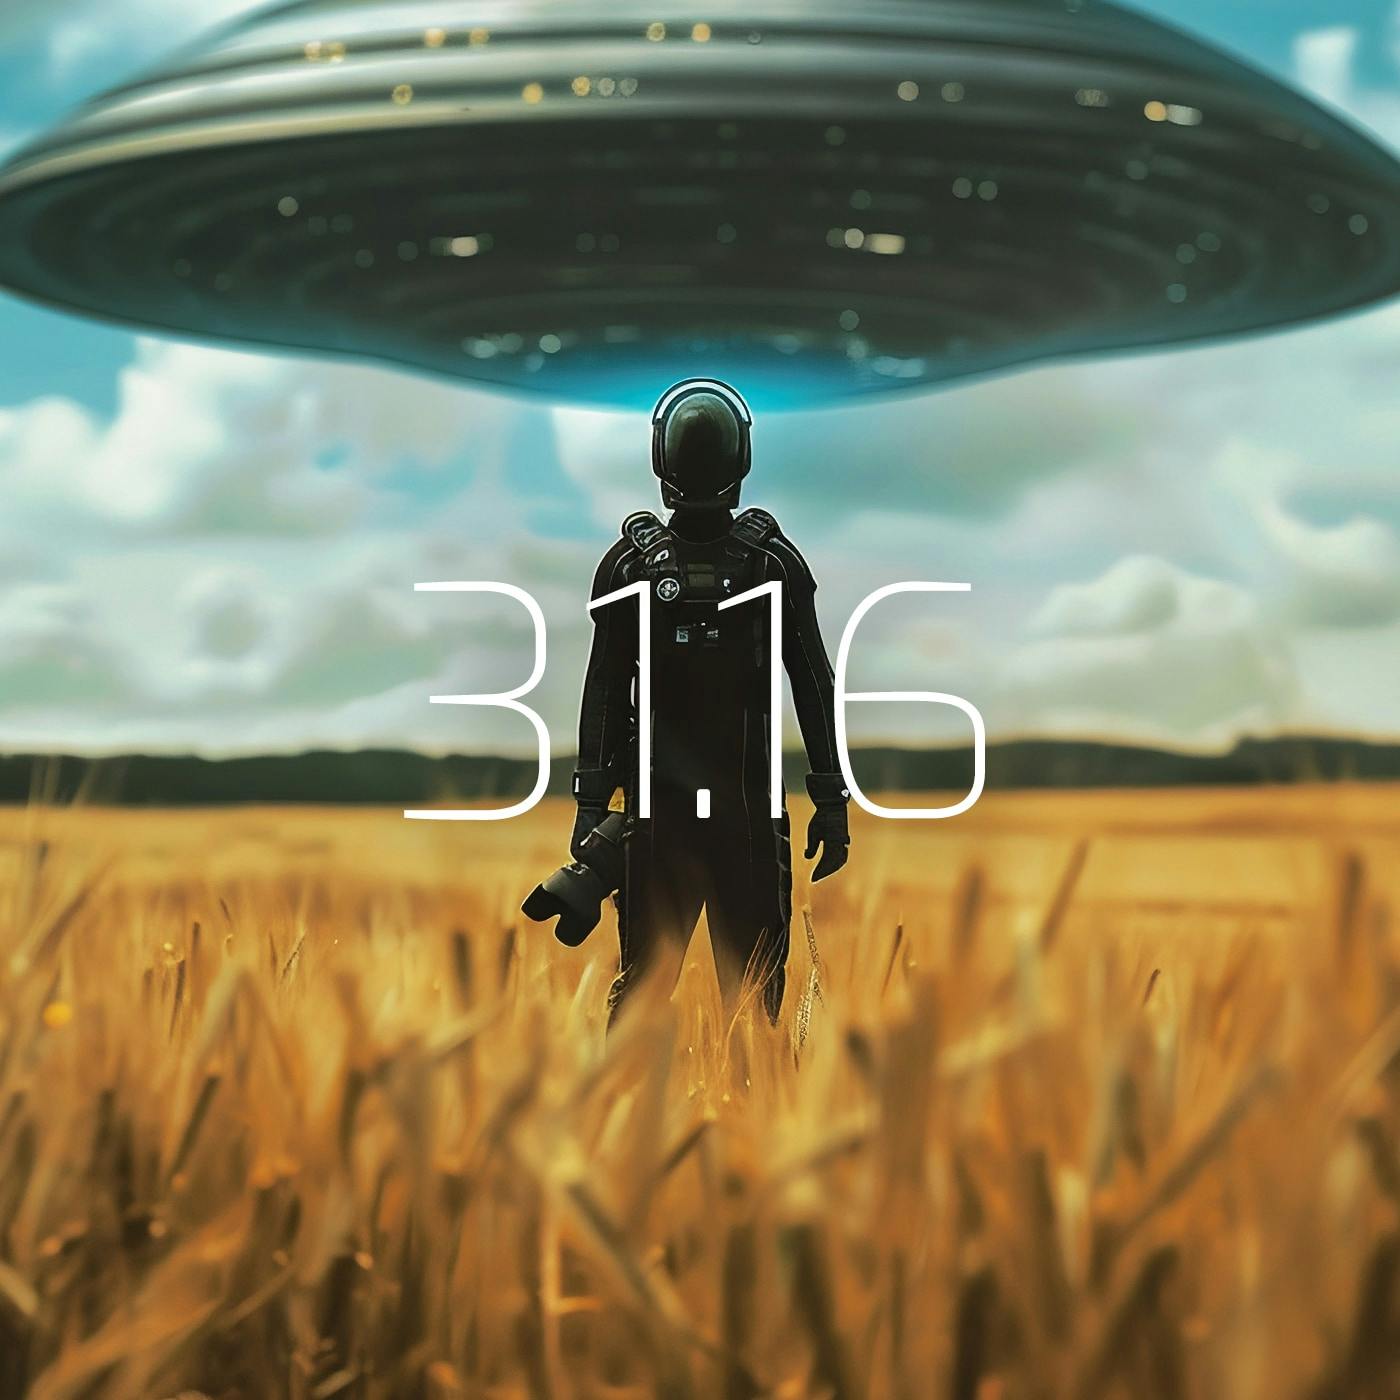 31.16 - MU Podcast - The Great Crop Circle Hoax